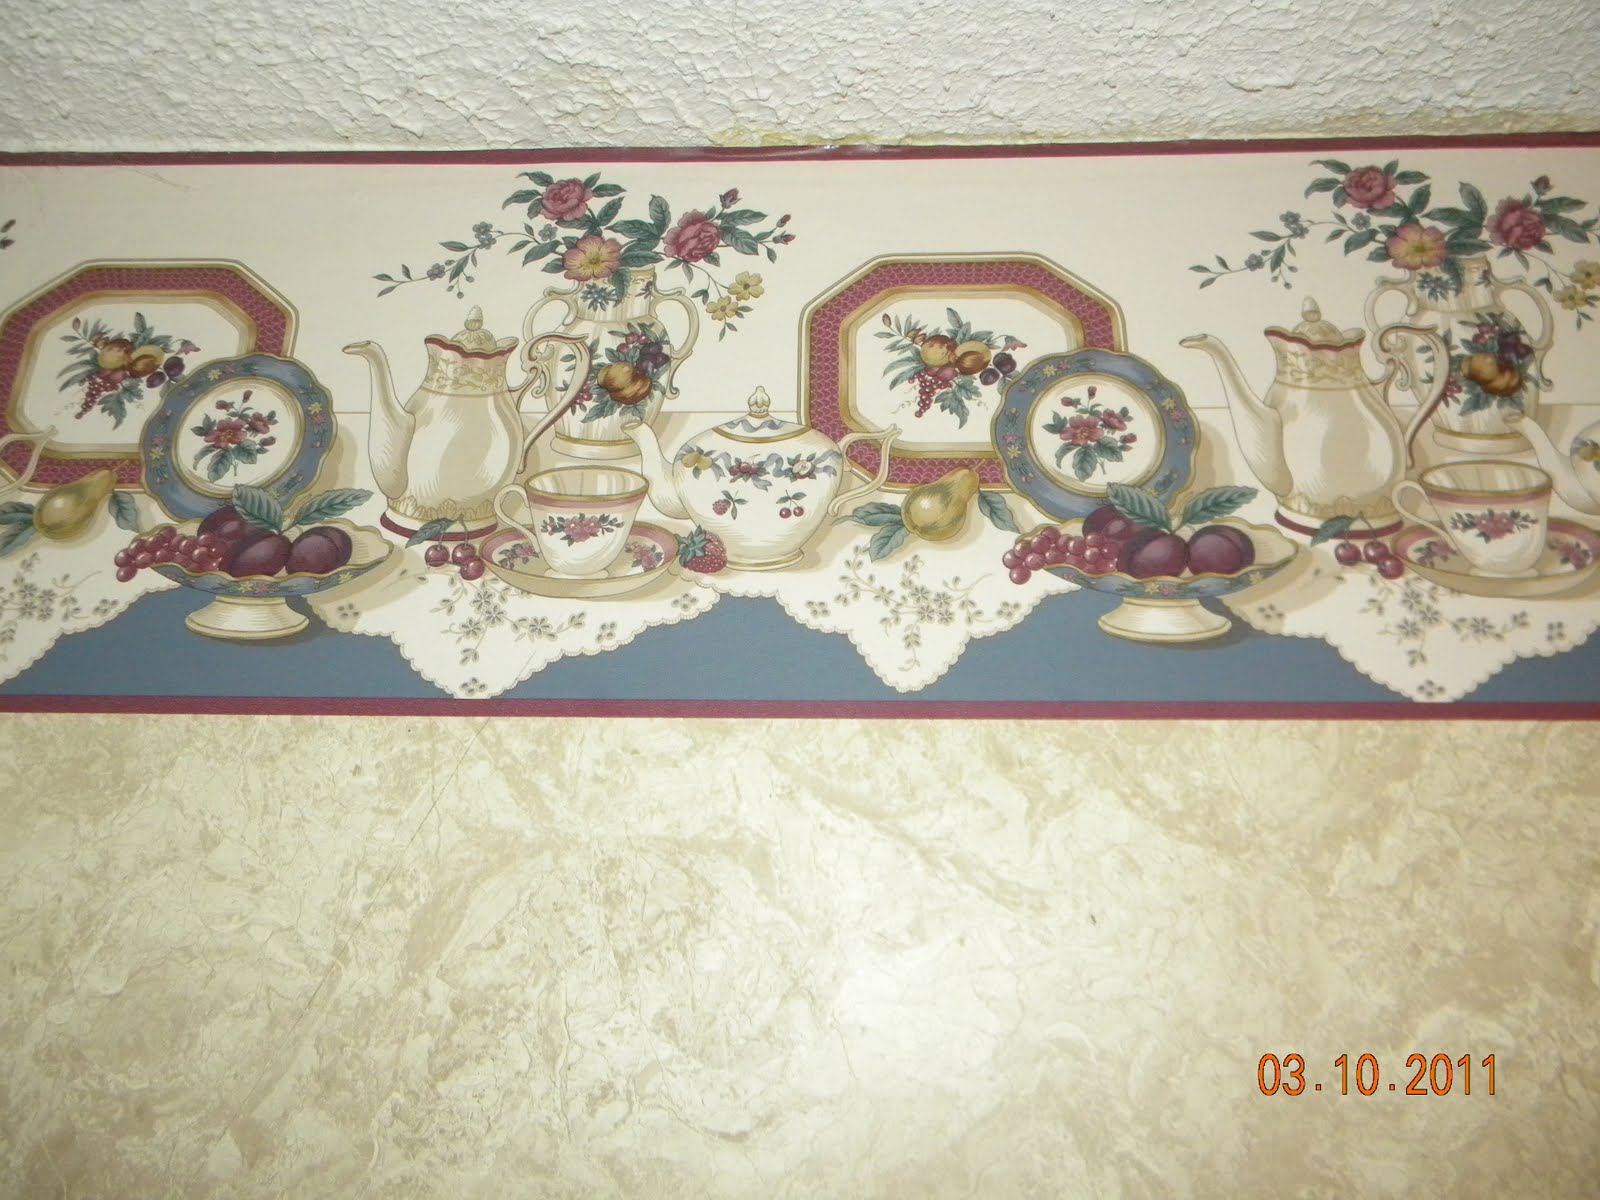 Borders Panels Panies In Home Dcor Wall Border And Frieze